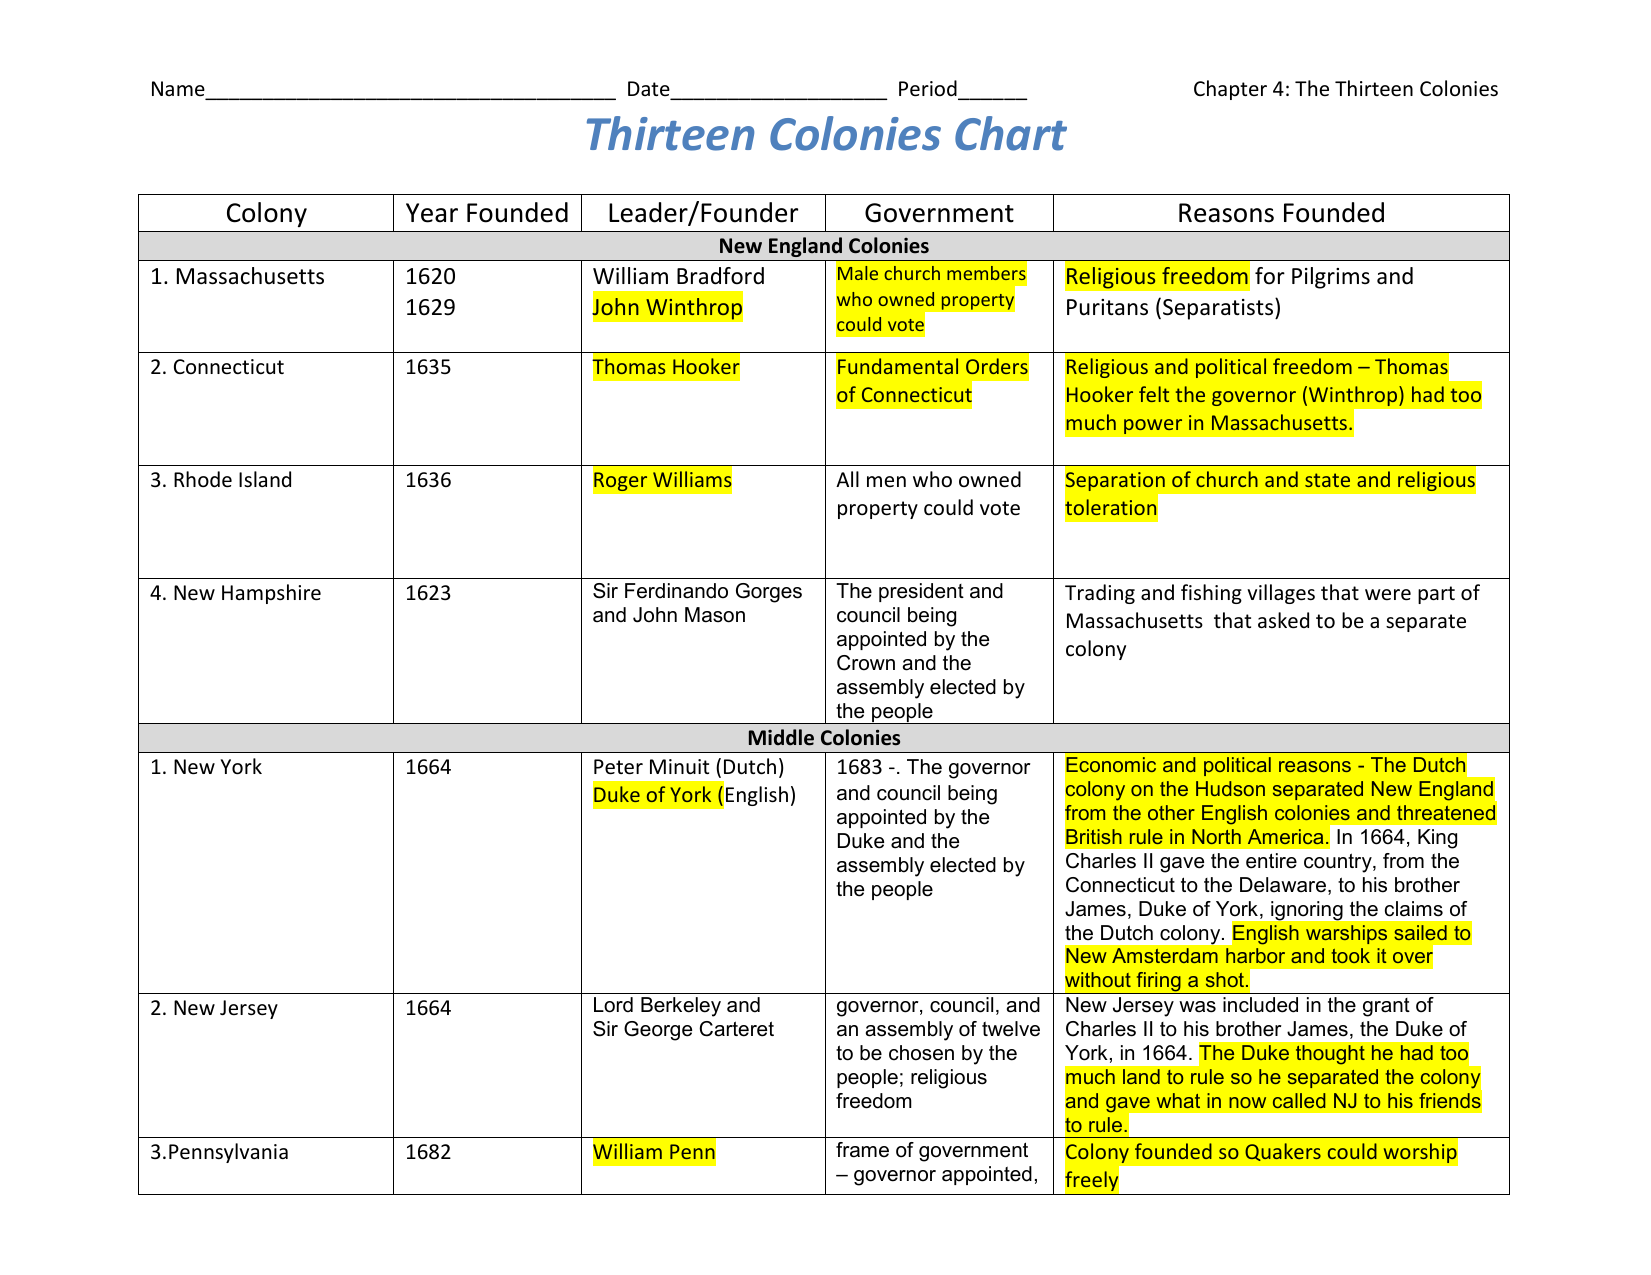 American Colonies Chart Answers